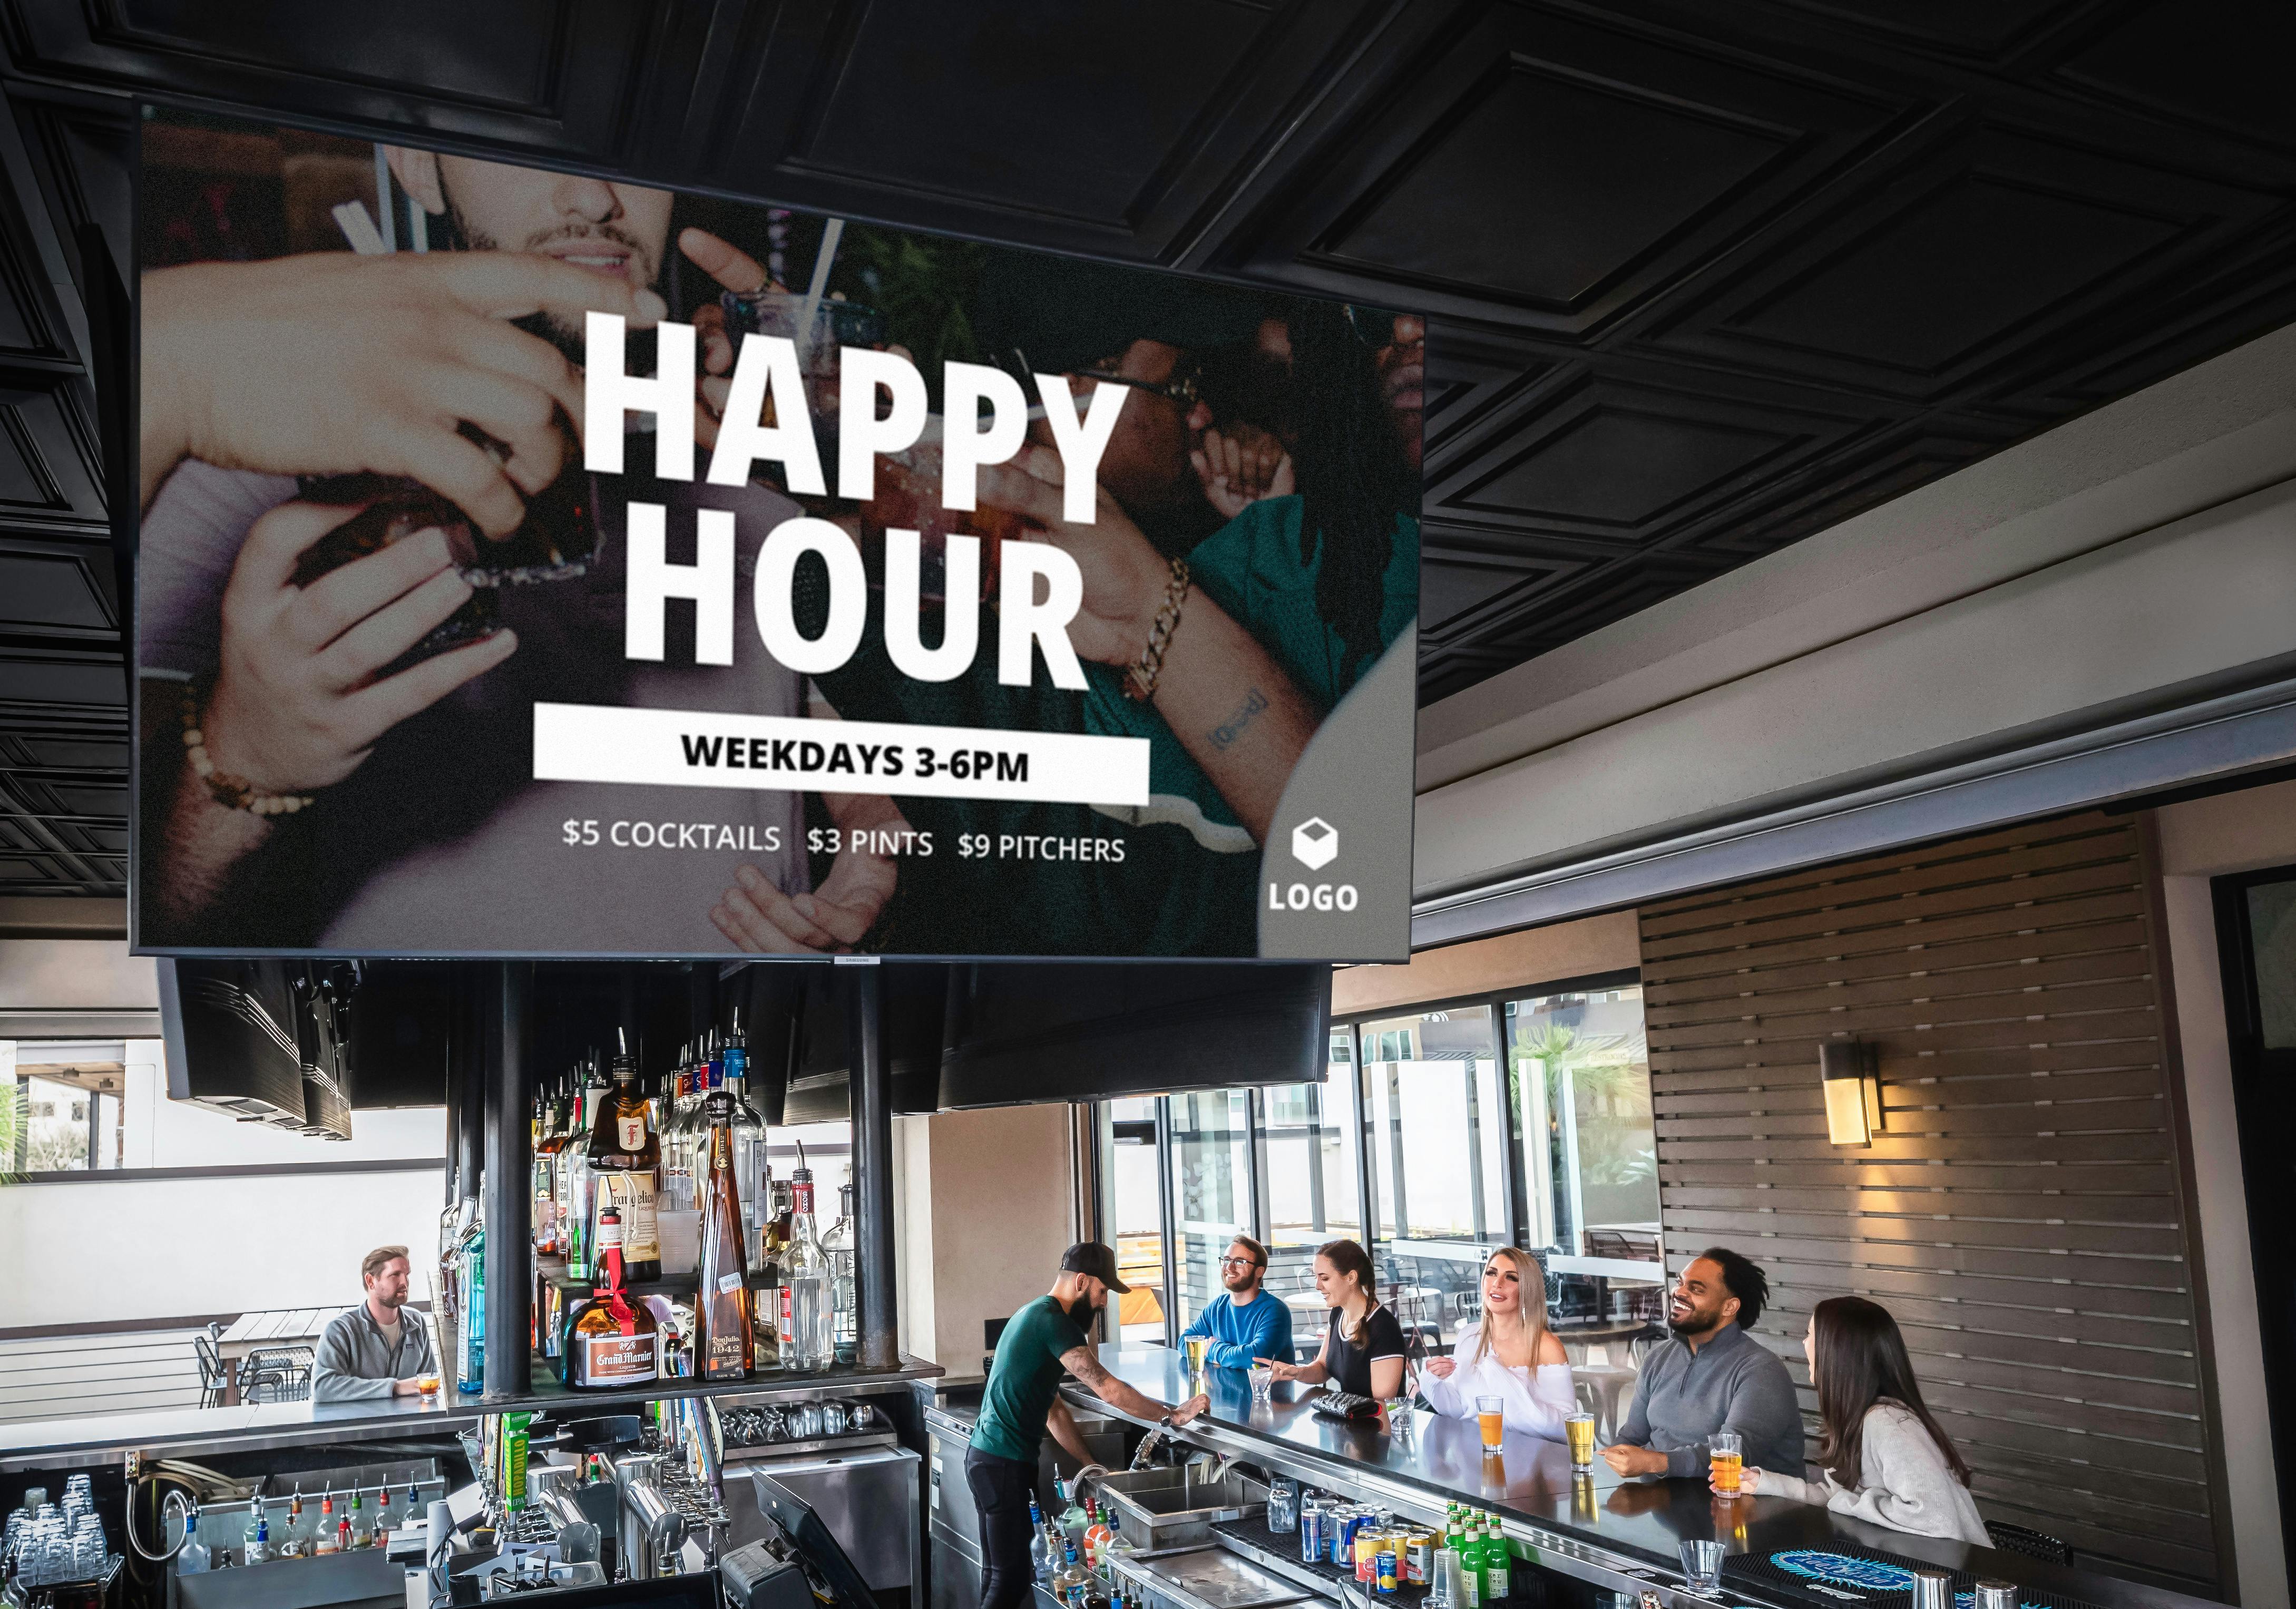 A customer using the Happy Hour template from Digital Signage on their TVs